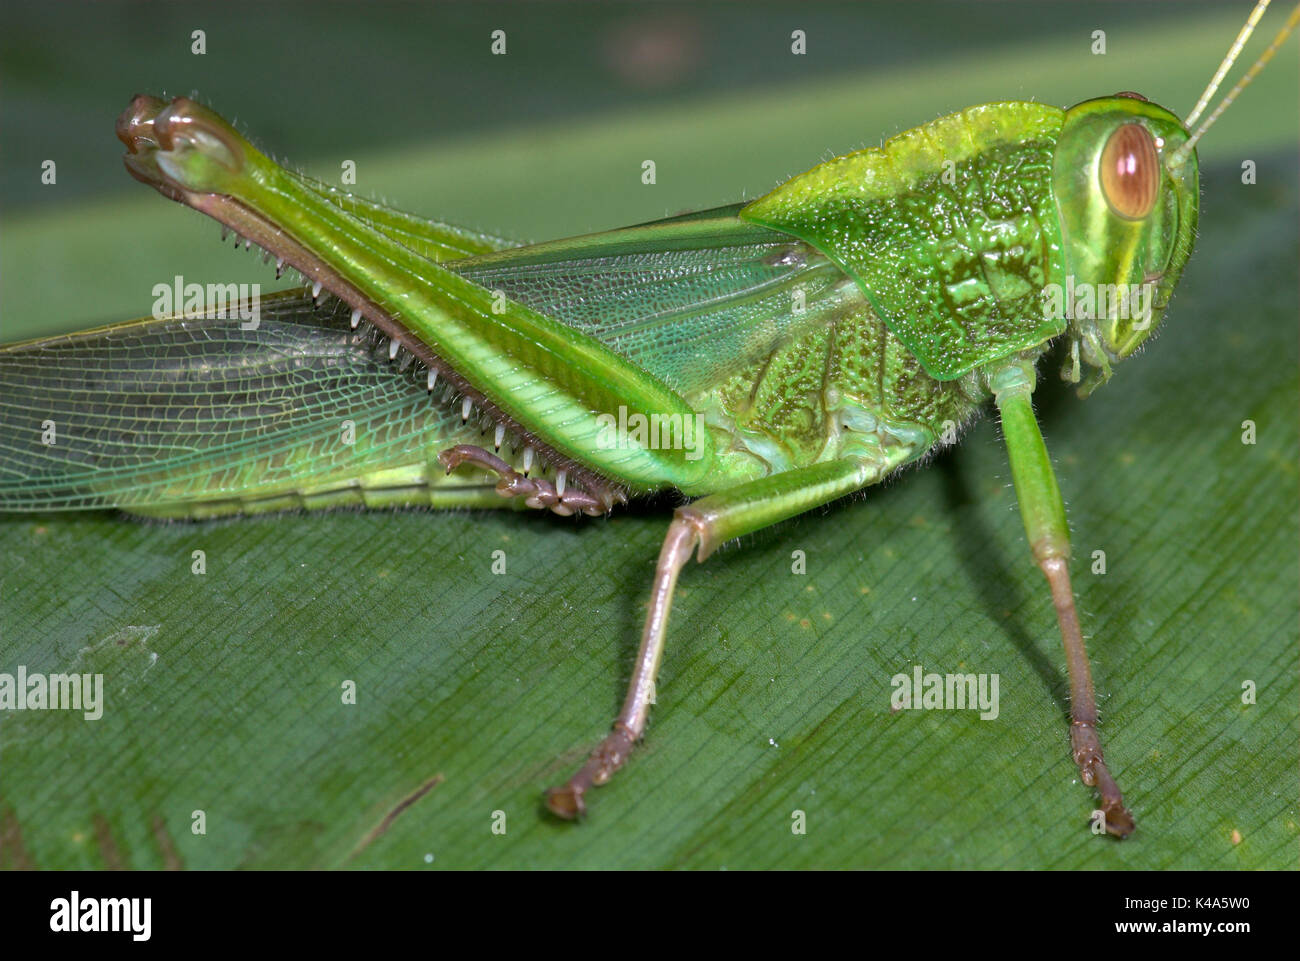 Jungle Grasshopper, Orthoptera sp, Thailand, green, large back legs for jumping Stock Photo